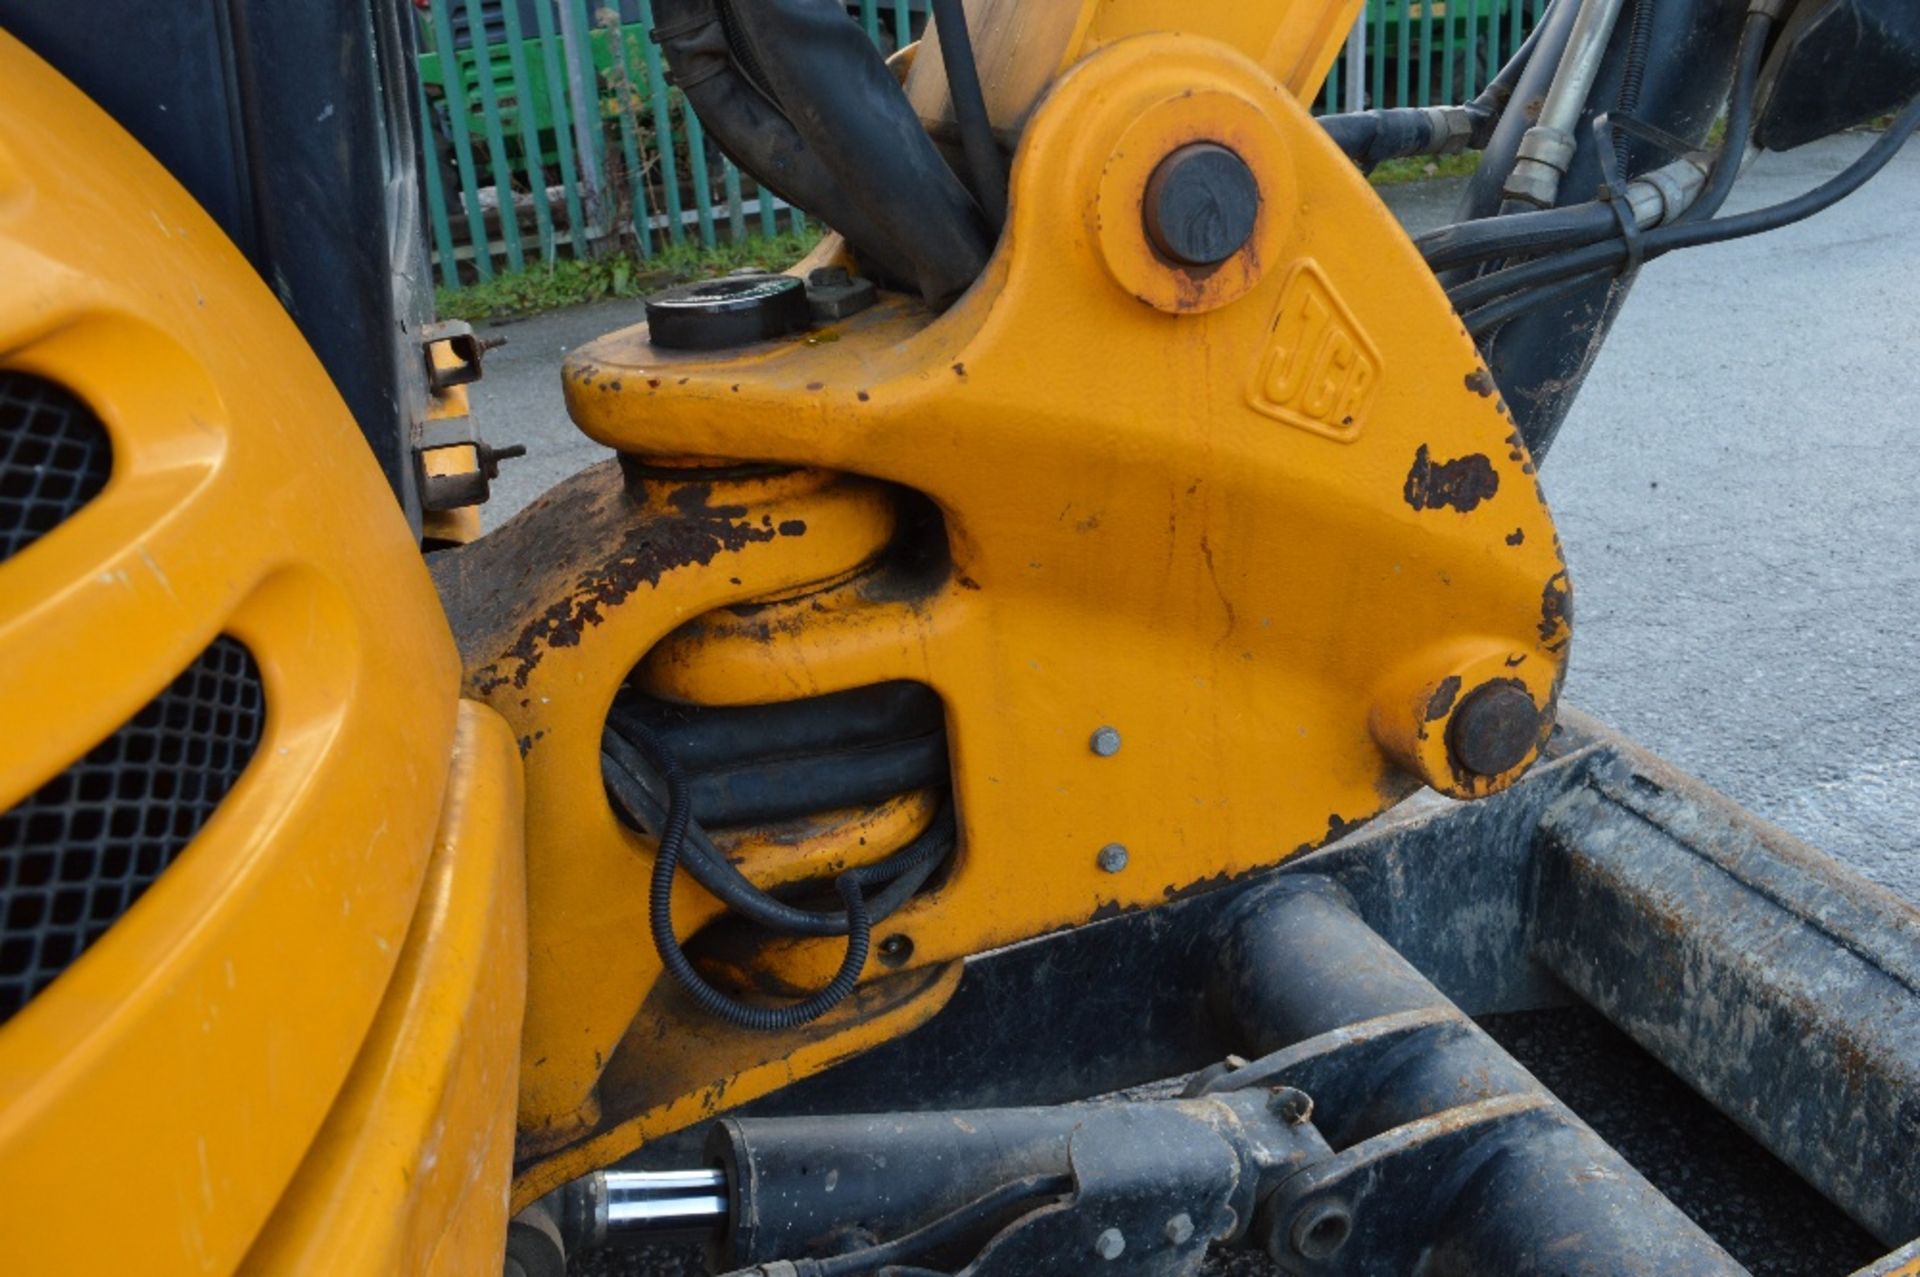 JCB 8050 RTS 5 tonne reduced tail swing rubber tracked mini excavator
Year: 2011
S/N: 1741659 - Image 9 of 12